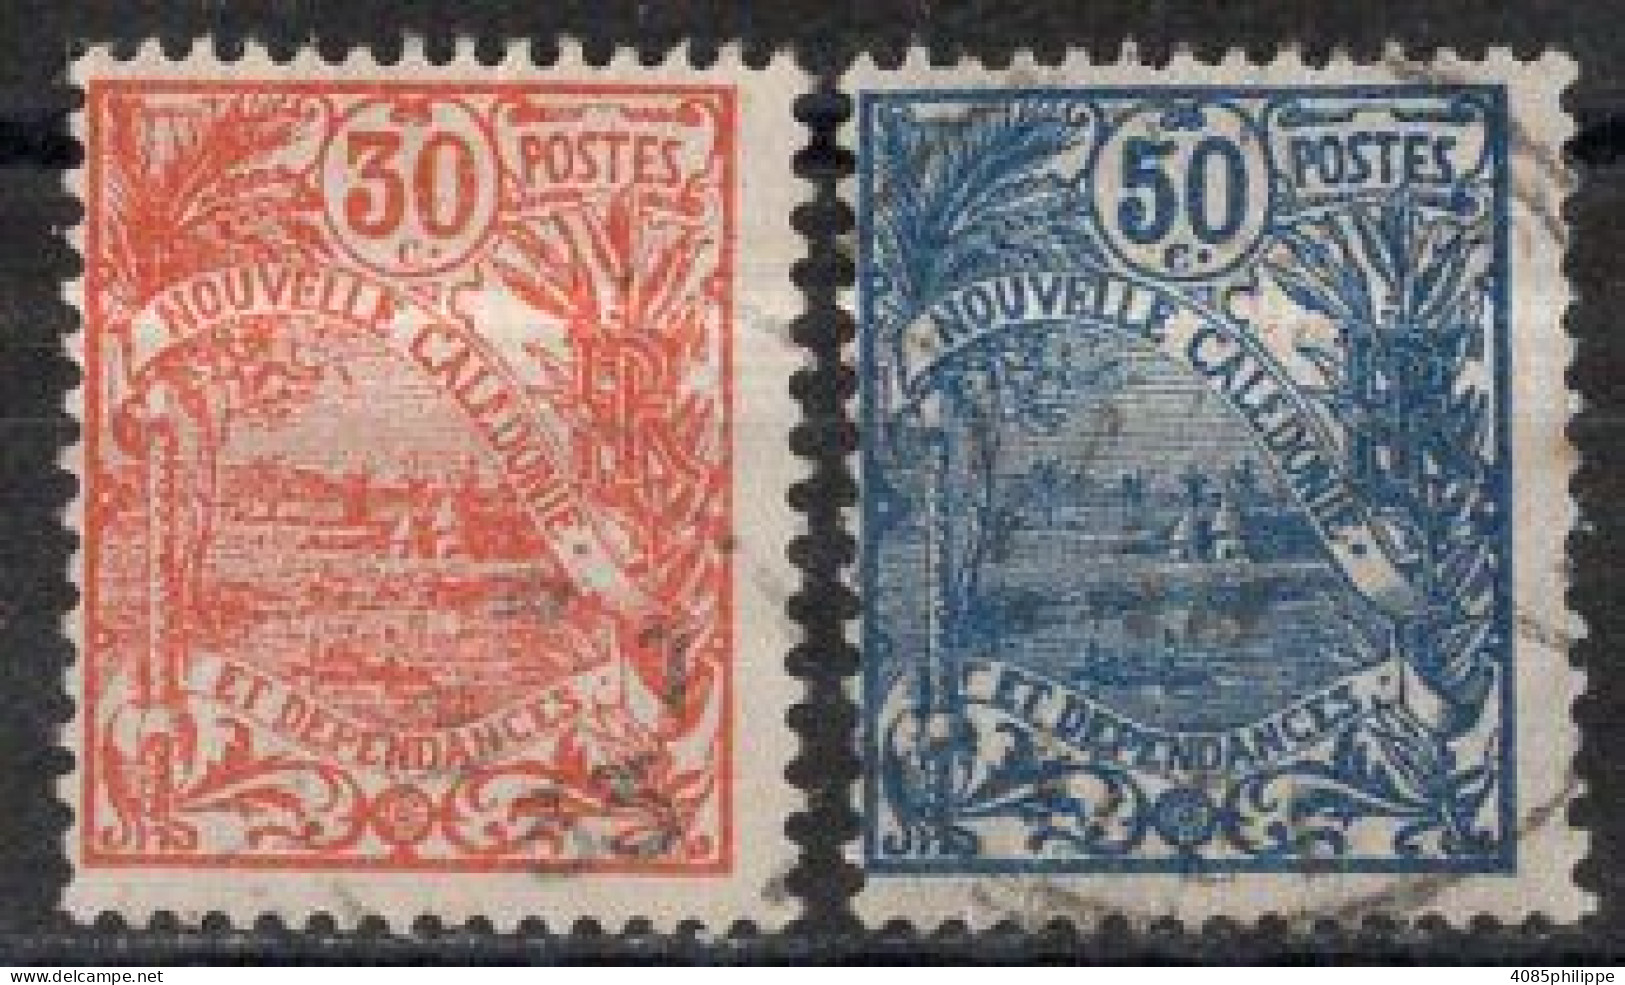 Nvelle CALEDONIE Timbres-Poste N°119 & 120 Oblitérés  Cote : 3€00 - Used Stamps